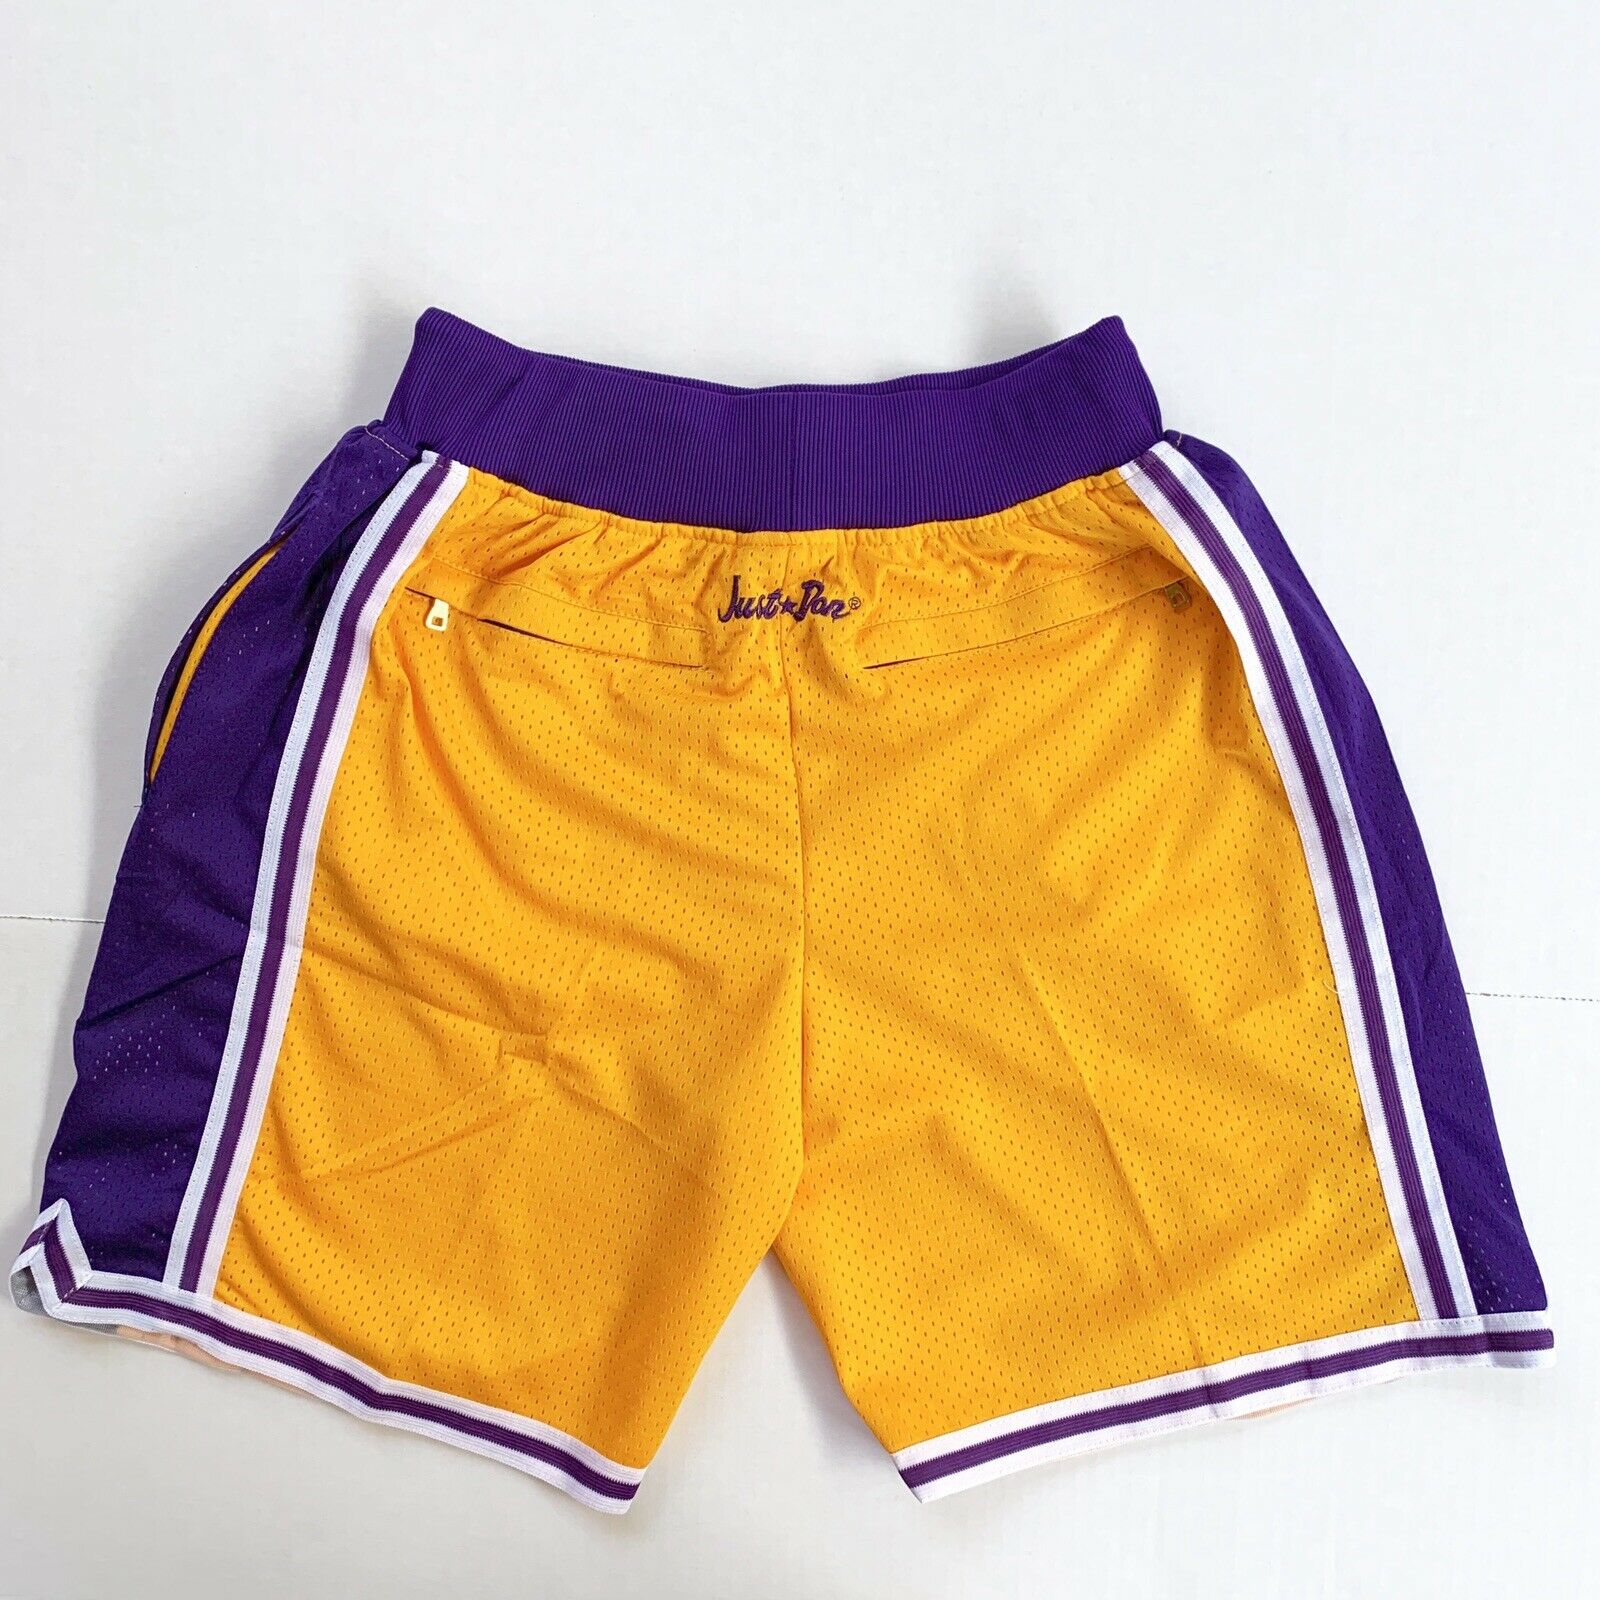 Los Angeles Lakers Vintage Retro Gold Just Don Summer League Basketball Shorts